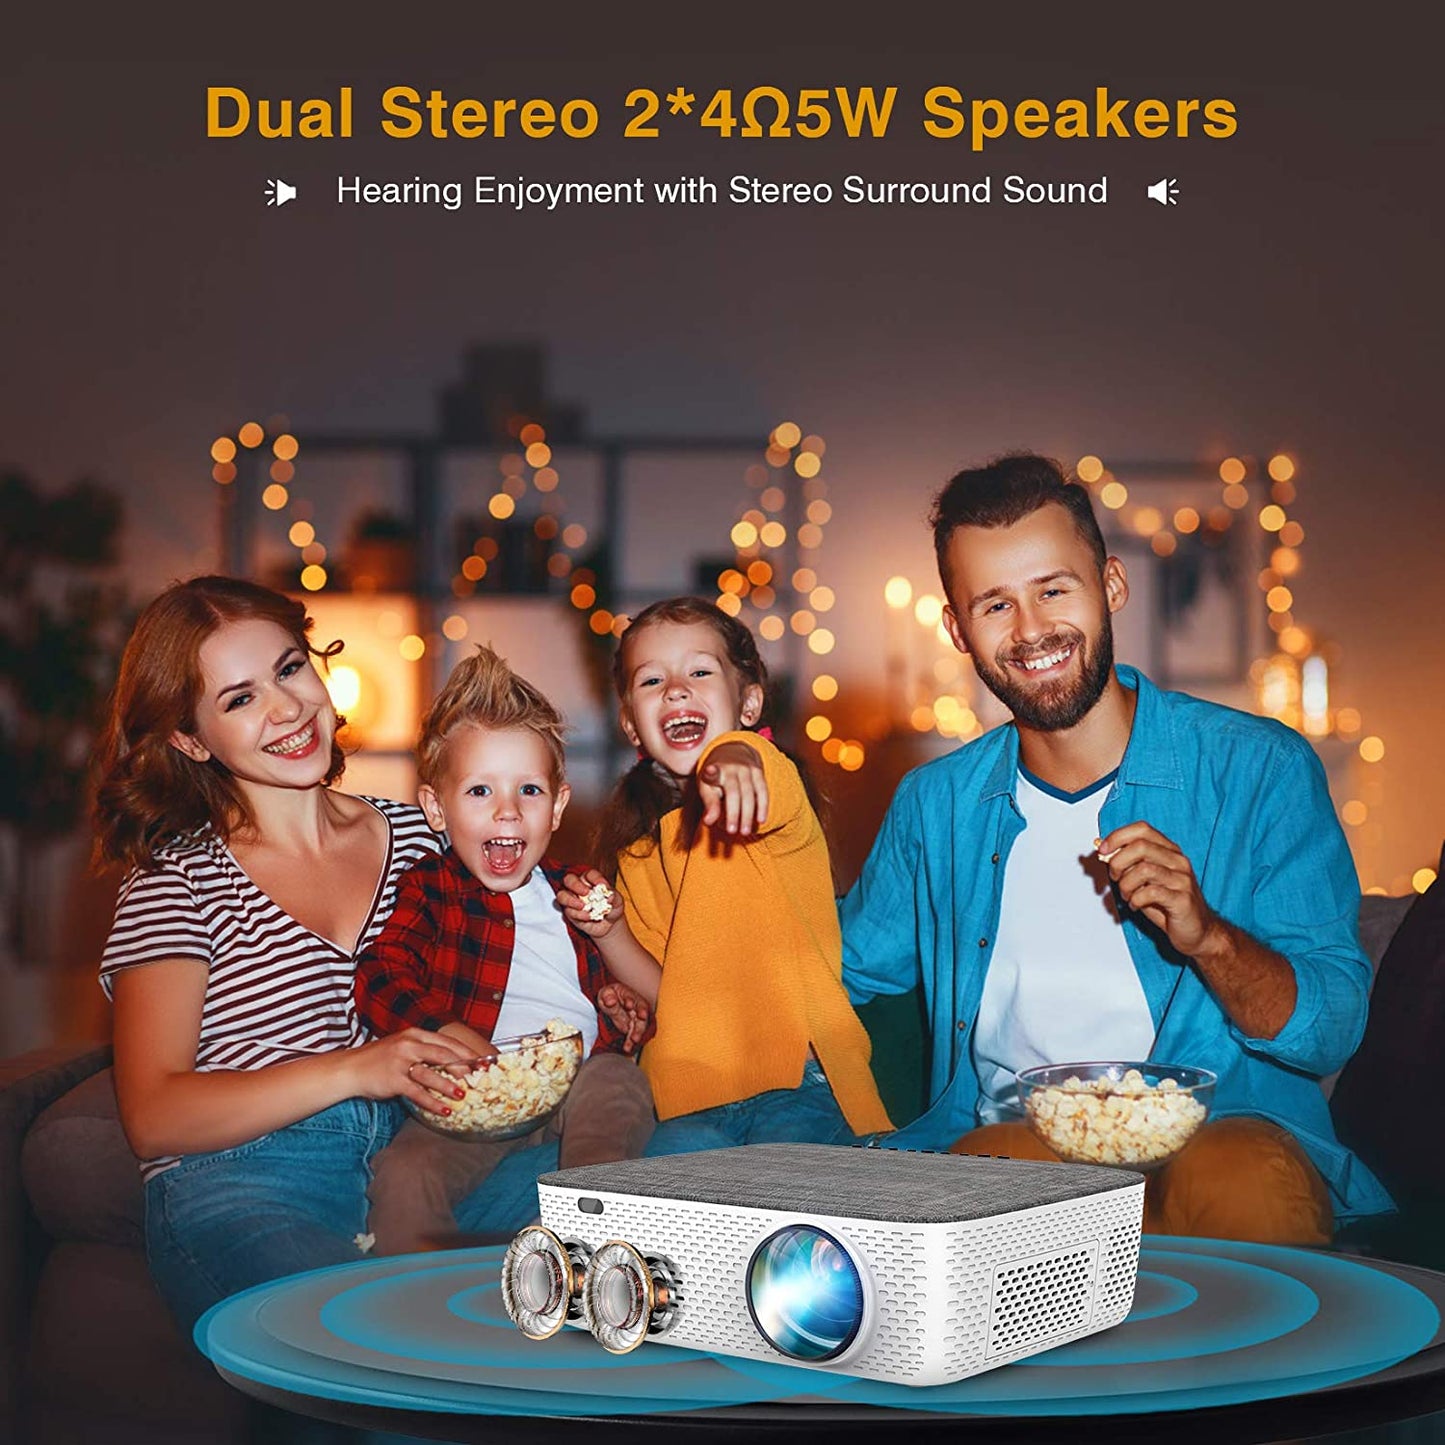 5G WiFi Projector 4K Supported - FANGOR 8500L Native 1080P Projector Bluetooth Outdoor Movie Projector / Full Sealed Design/Digital Keystone/300” Display/50% Zoom, for Phone/PC/DVD/TV/PS4